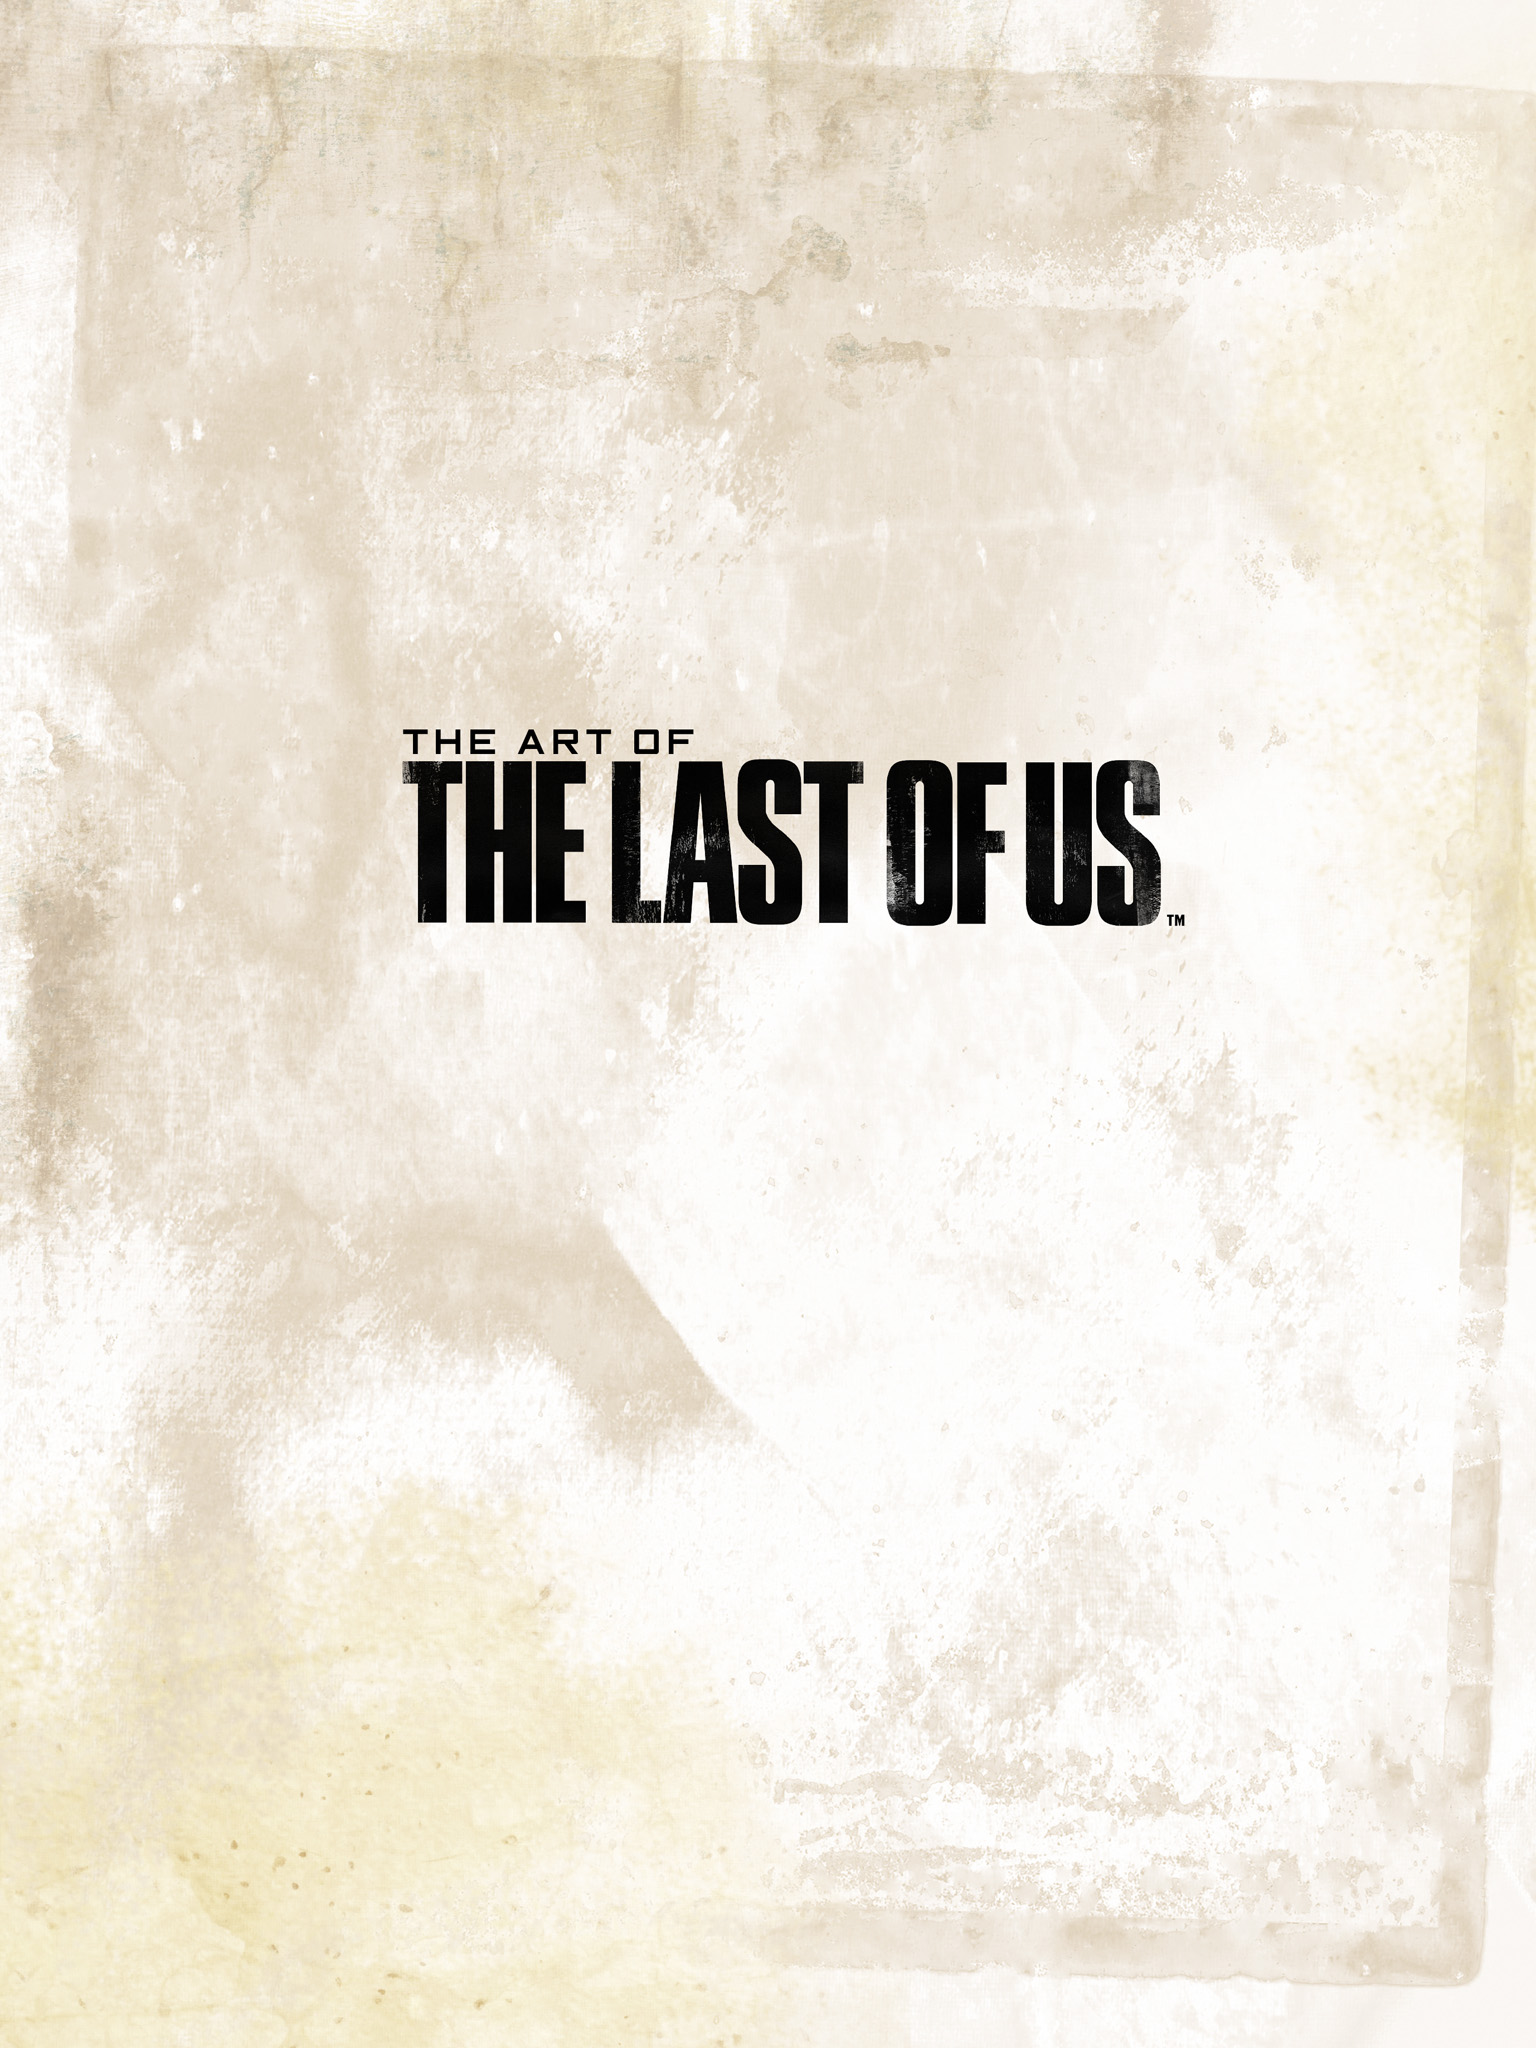 Read online The Art of the Last of Us comic -  Issue # TPB - 2